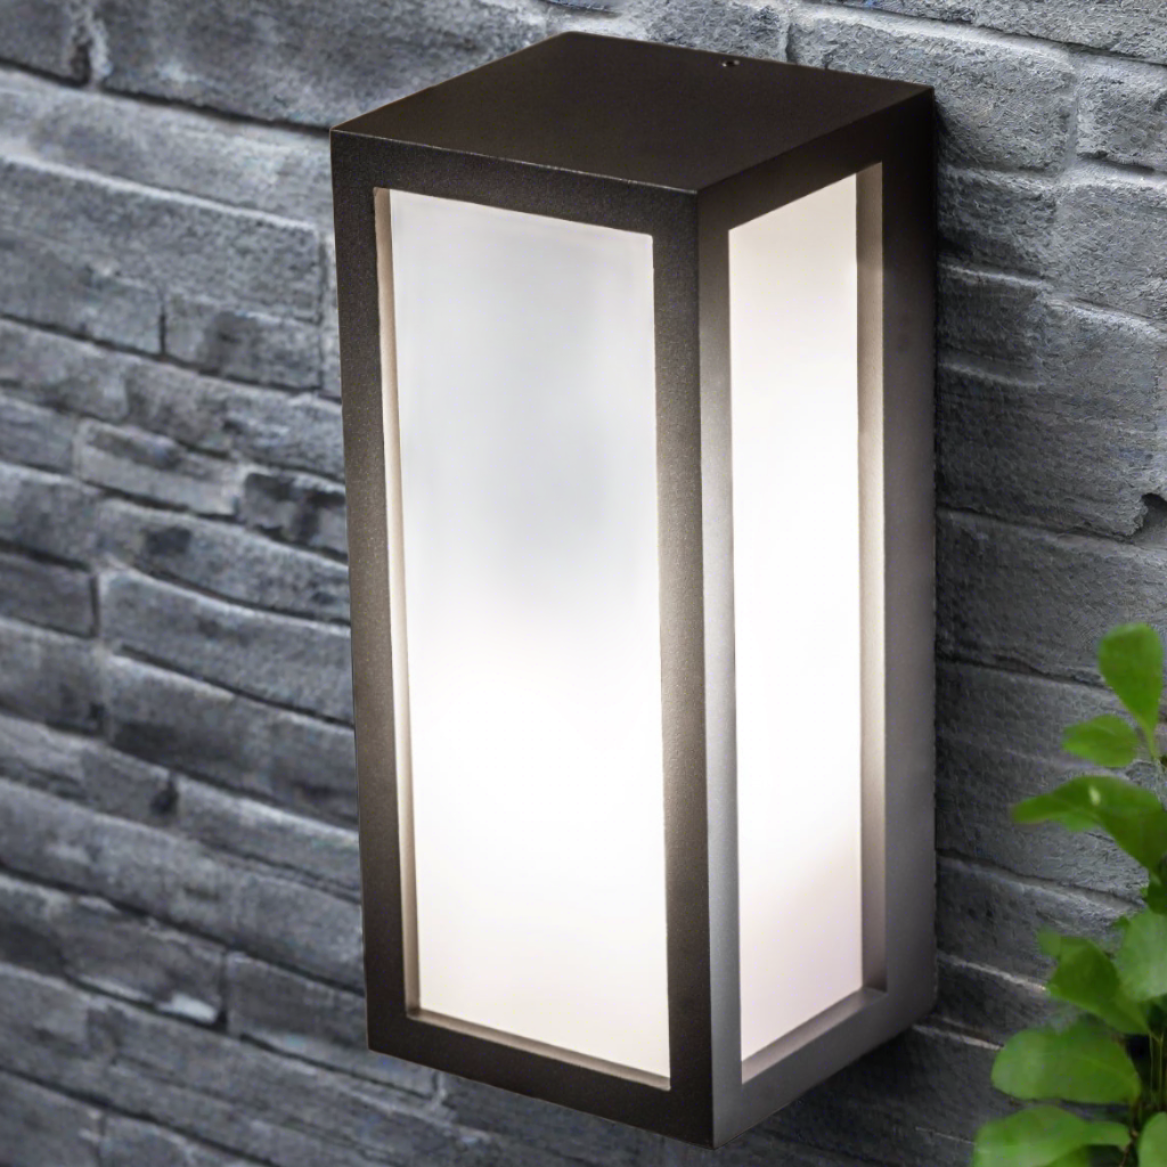 If you’re looking for a modern take on a traditional outdoor wall light, this black aluminium rectangle wall light is perfect for adding style and protection for your home. This classic design with a contemporary twist, styled with a metal rectangle shape and fitted with opal diffusers also contains an imposing black finish, making it ideal for any home design - adding a statement to any wall it fits in